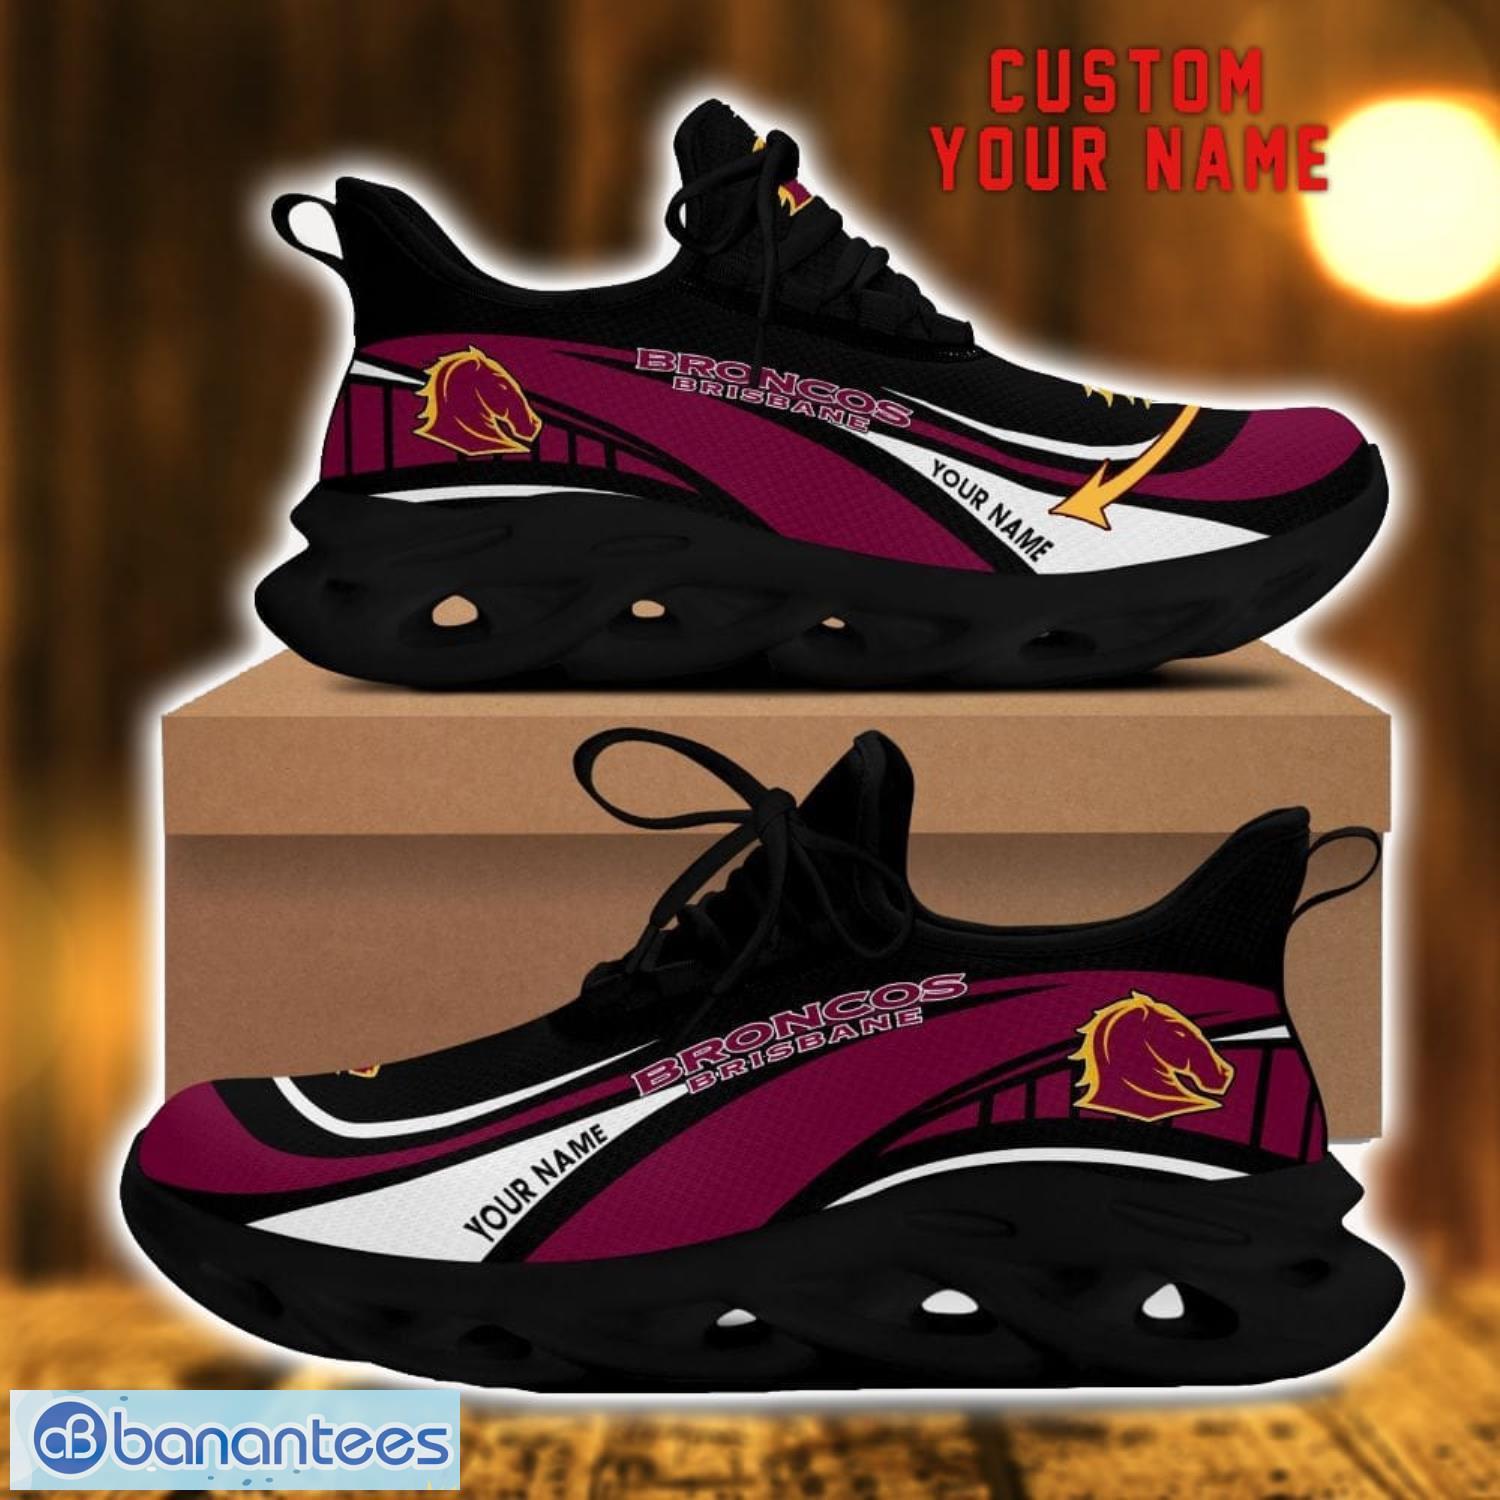 brisbane broncos sneakers max soul shoes custom name for men women limited shoes